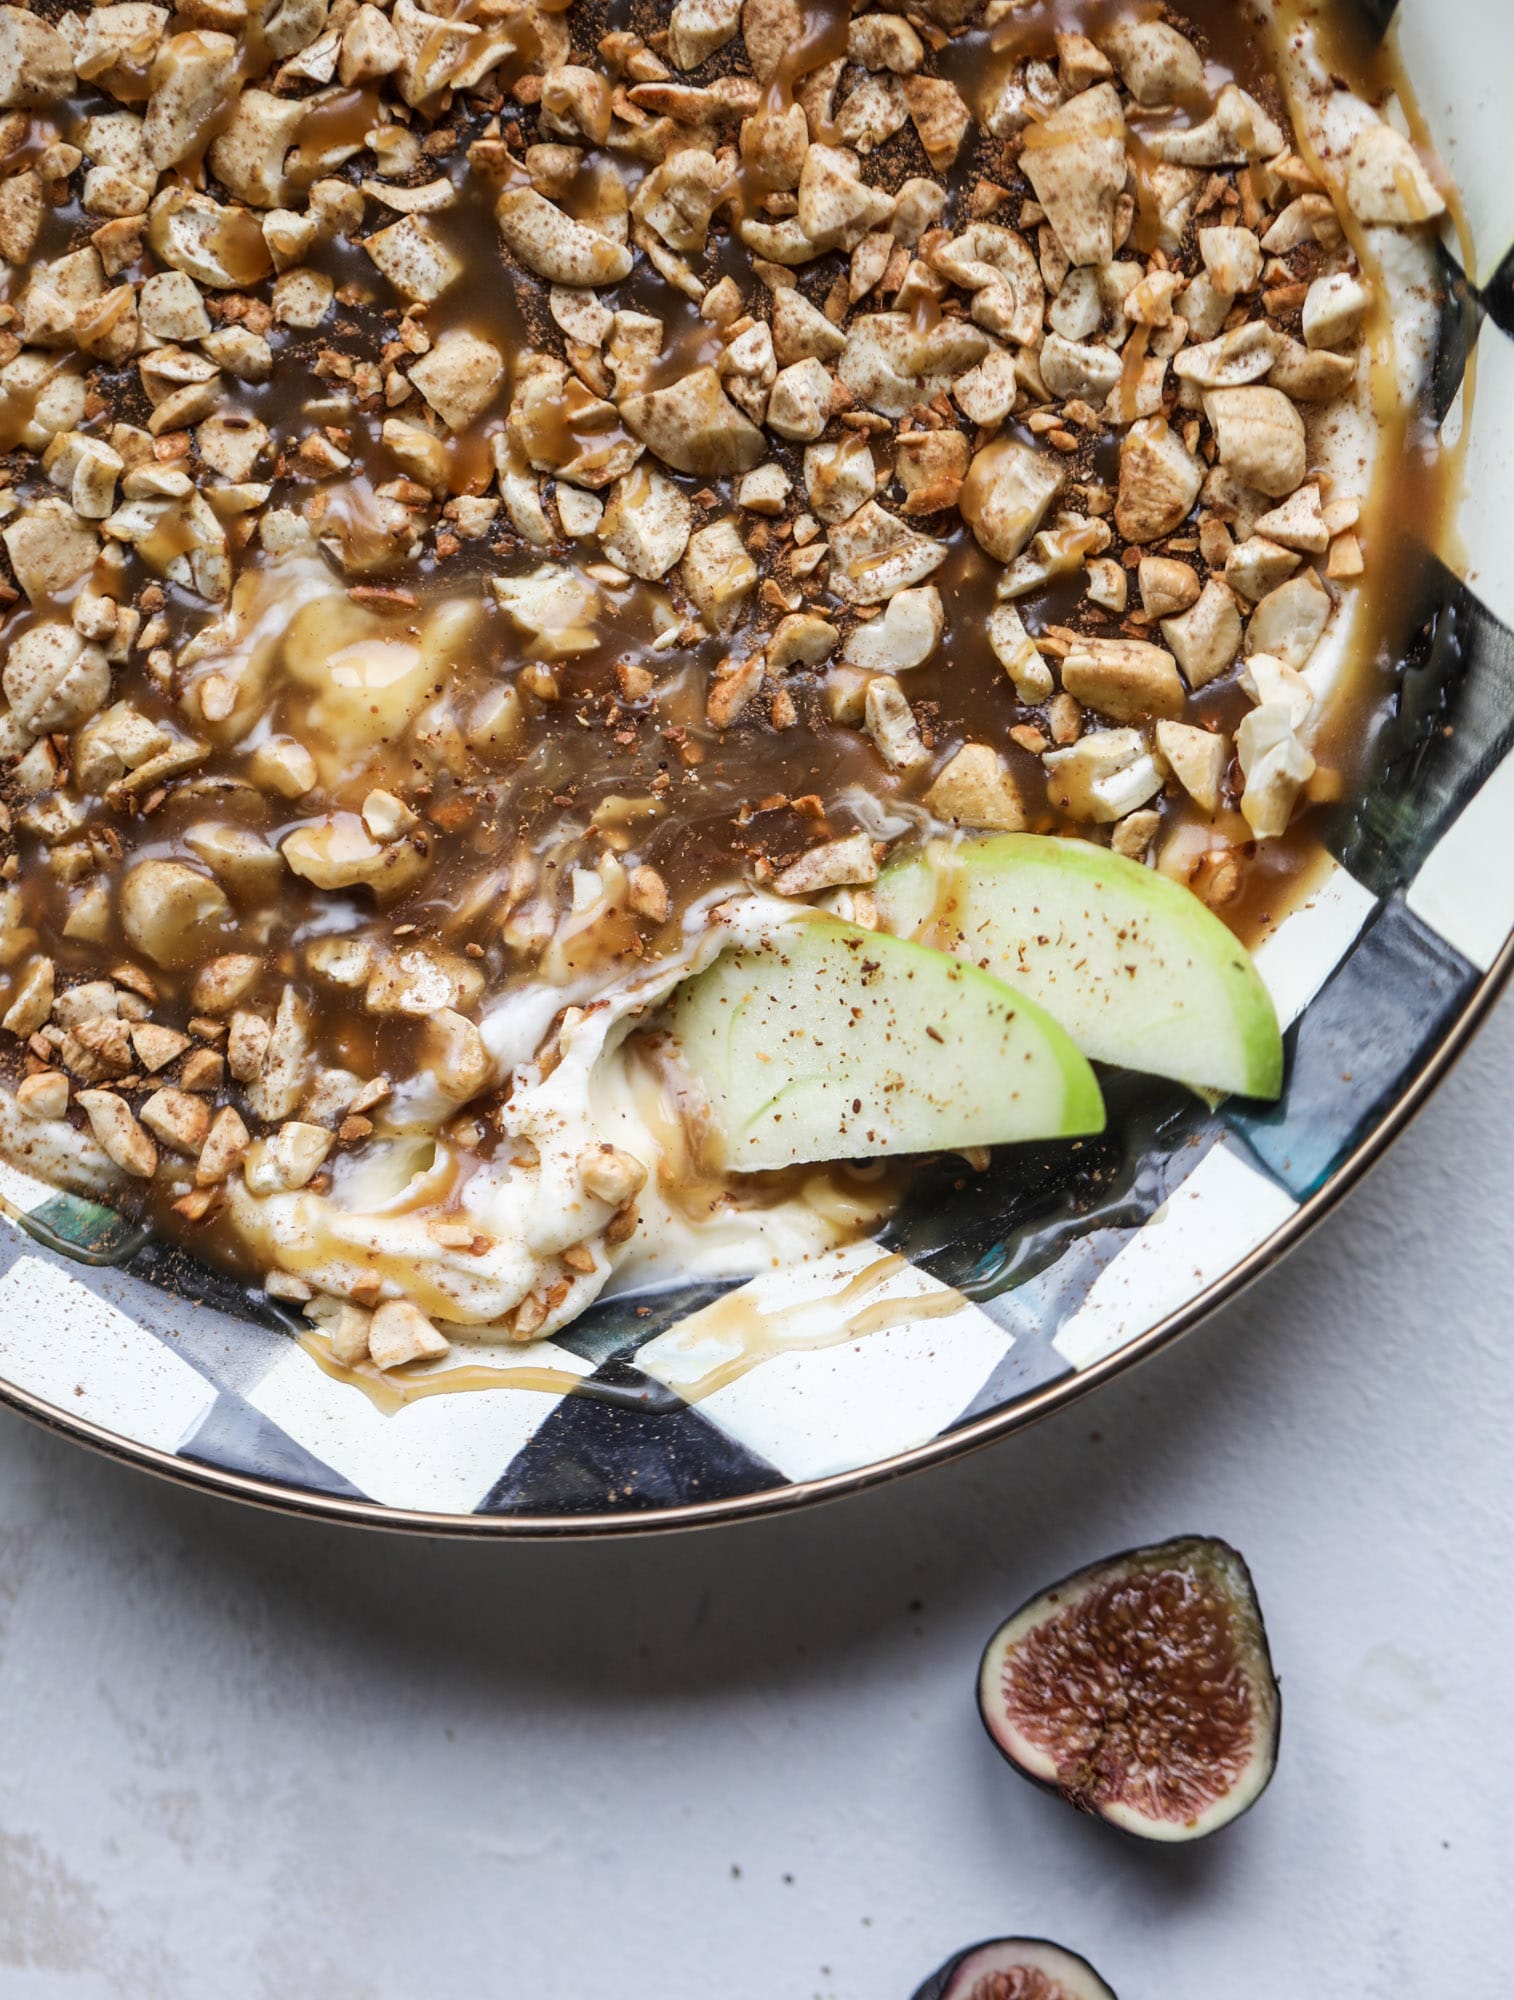 This caramel apple dip is my take on the old-school cream cheese based dip that is super delicious! Here, we have a mascarpone base with a bourbon caramel sauce, topped with roasted chopped cashews. Just add apples! I howsweeteats.com #caramel #apple #dip #appetizer #snack